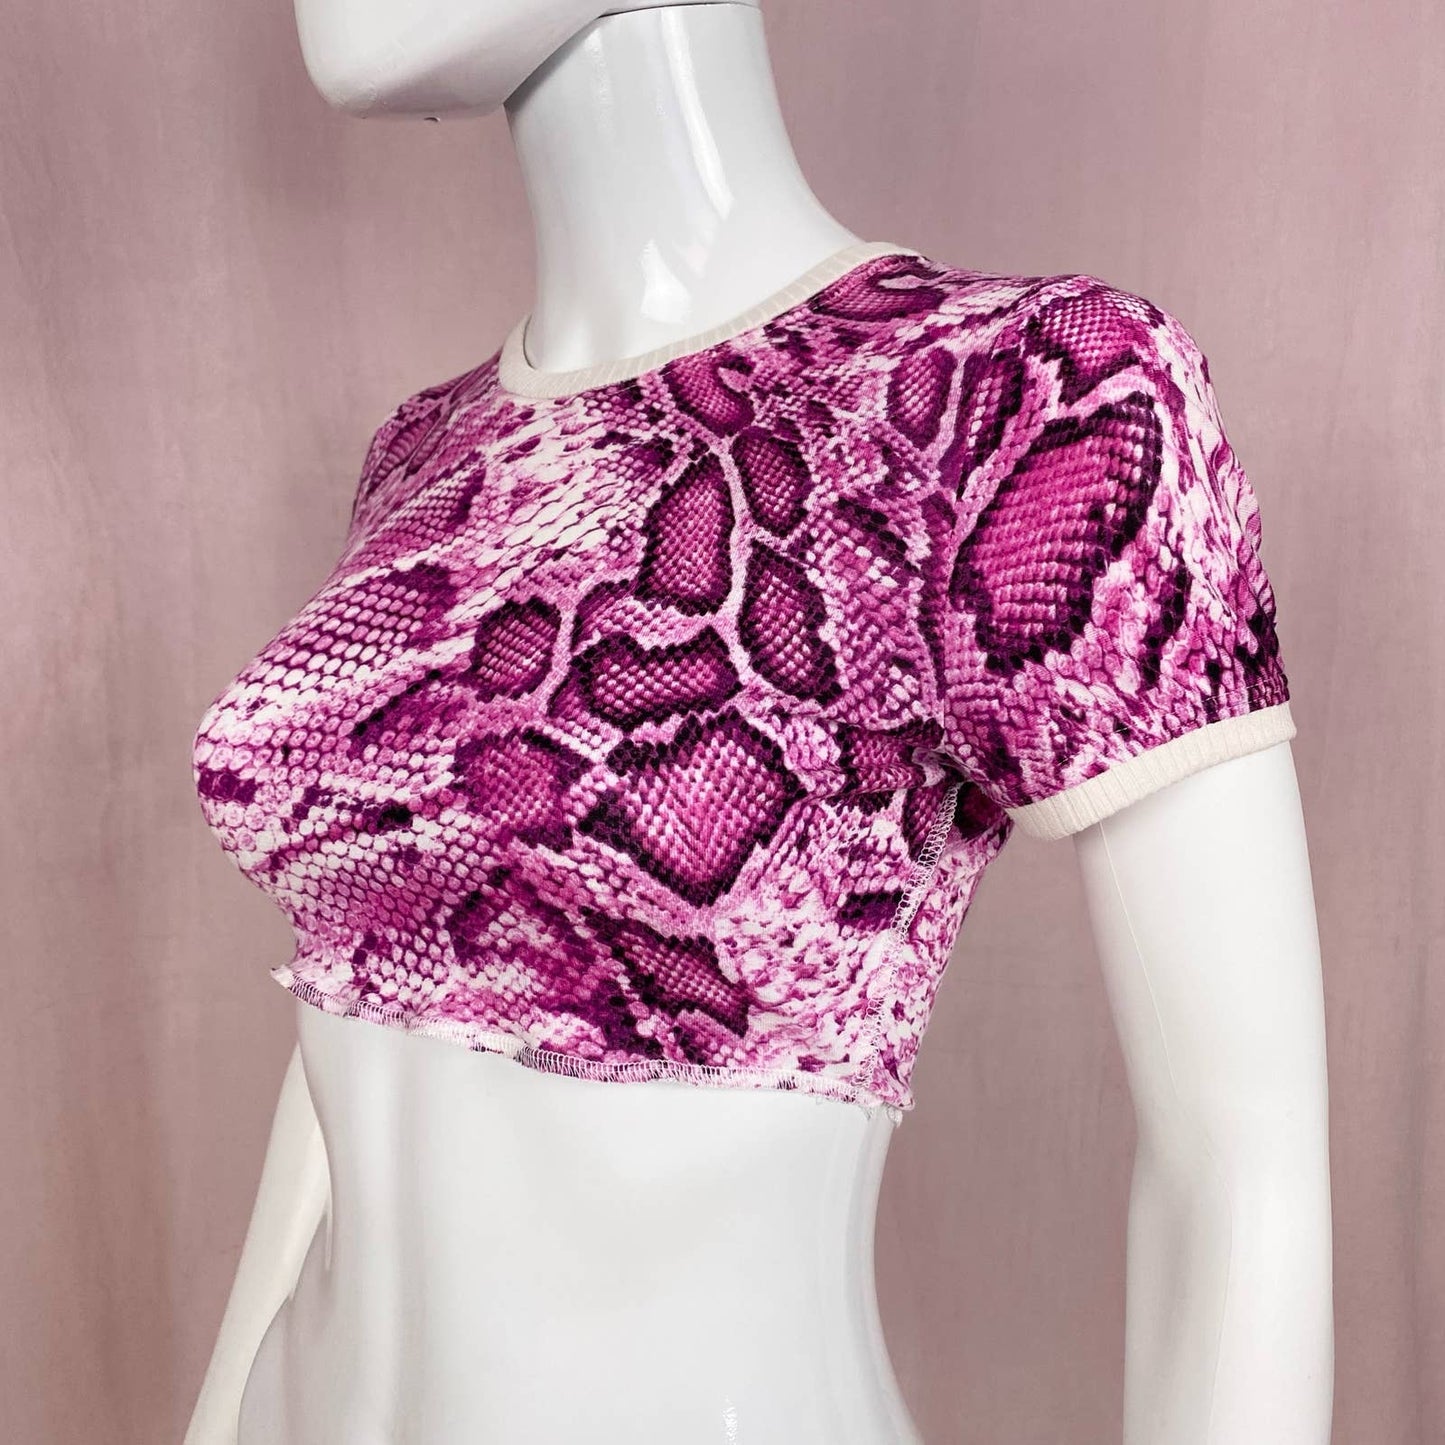 Reworked Y2K Pink Snake Print Crop Tee, Size Small